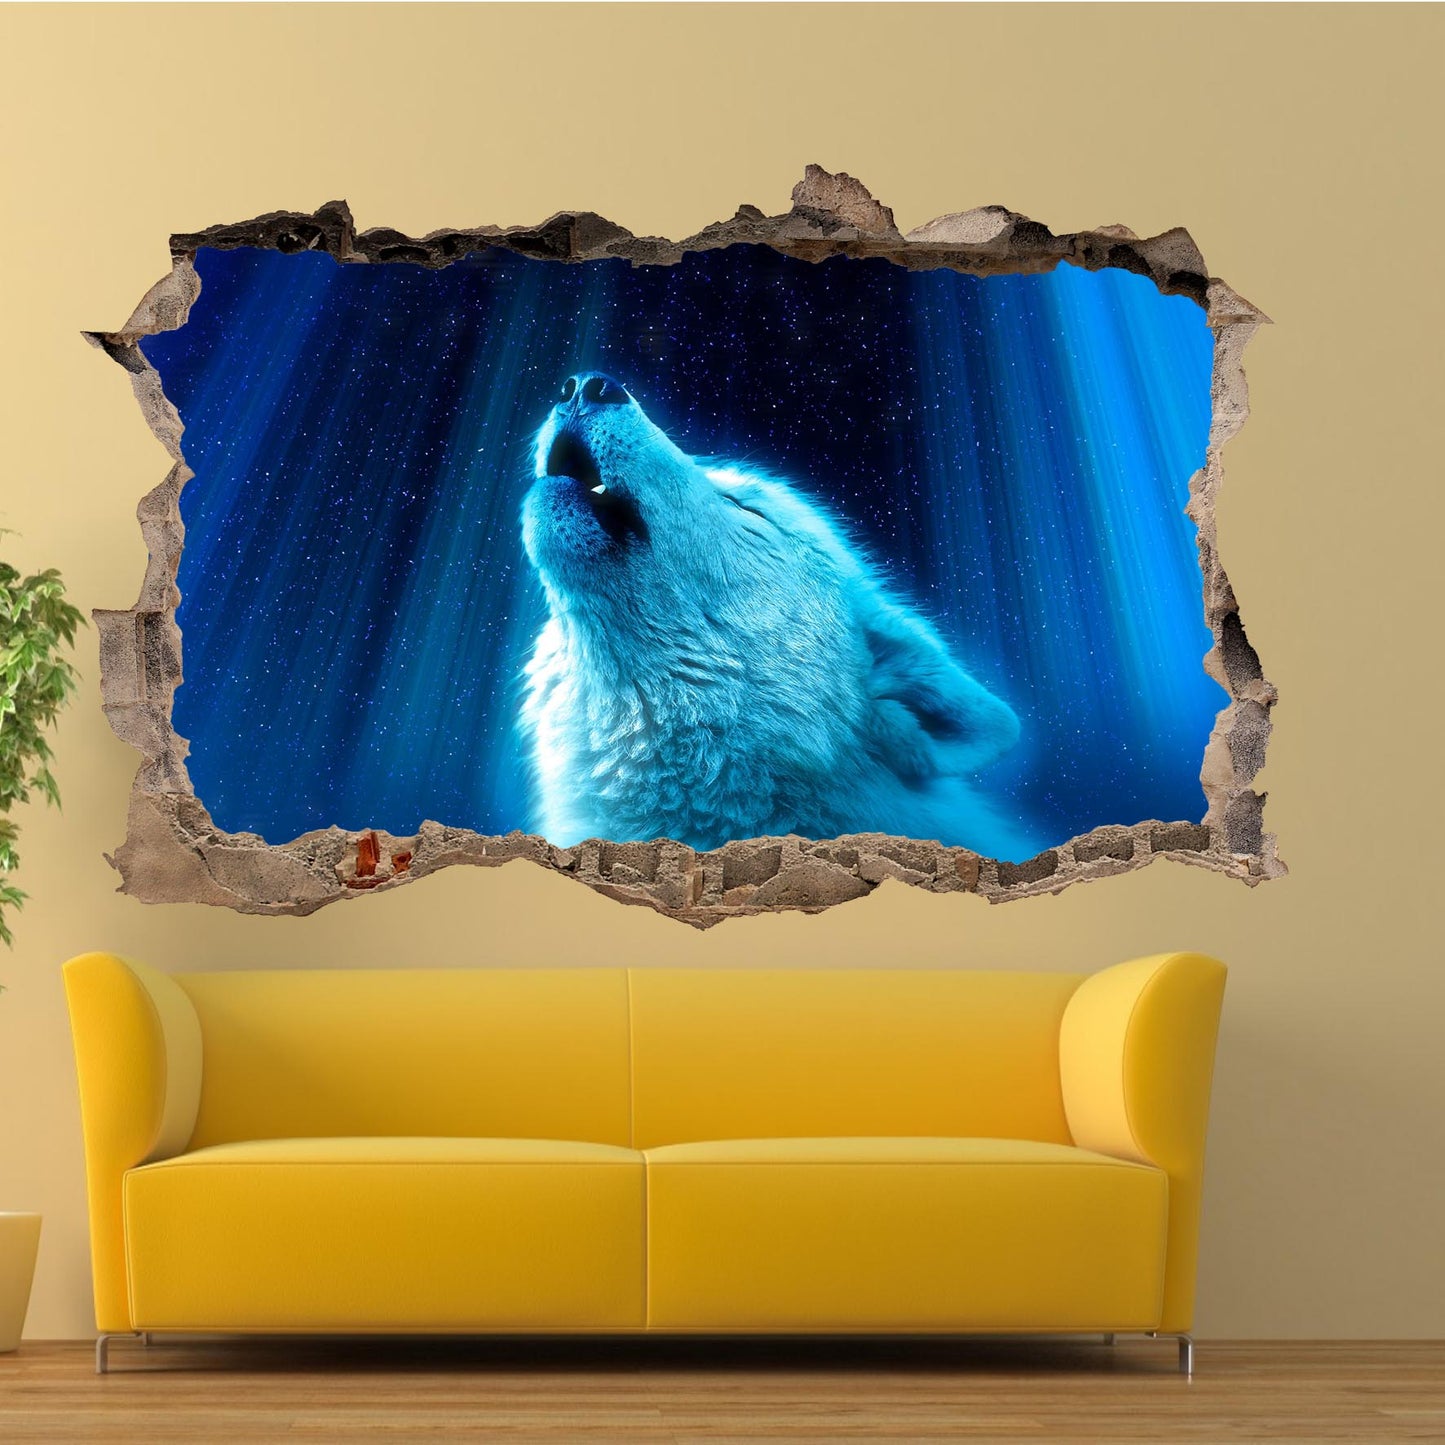 White Wolf Wall Sticker Poster Decal Mural